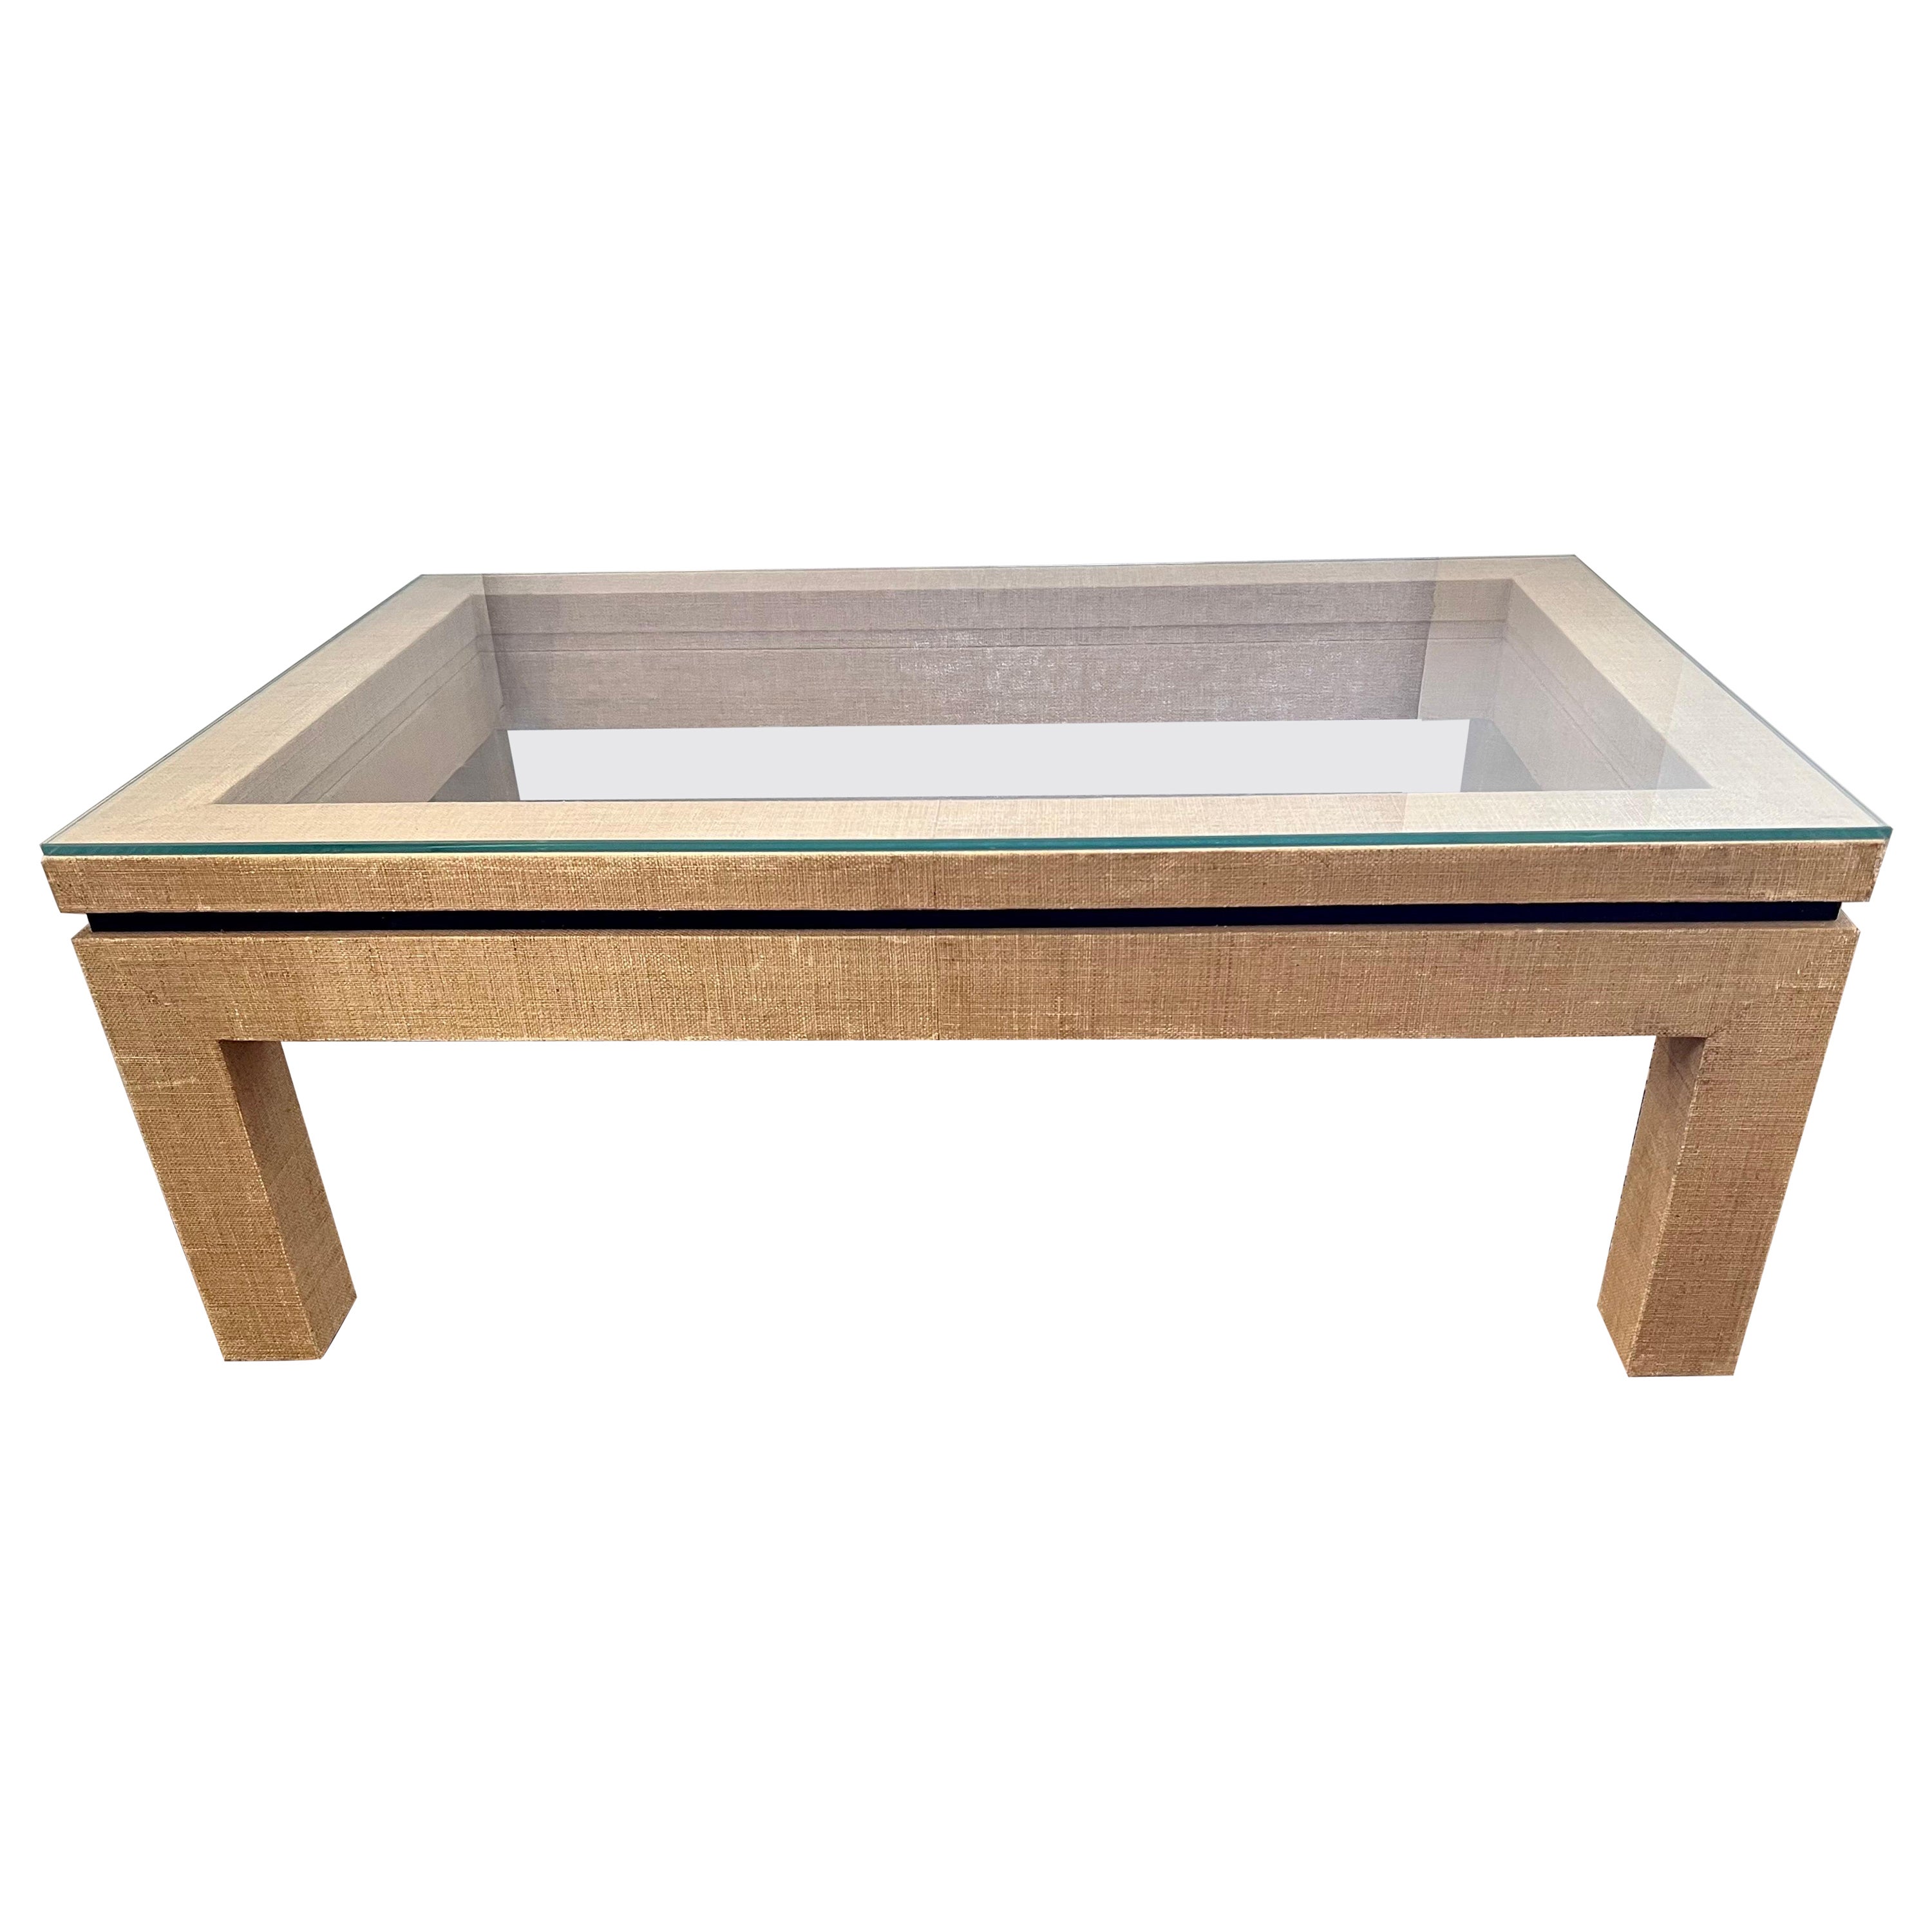 Barclay Butera Raffia Covered Glass Top Cocktail Coffee Table